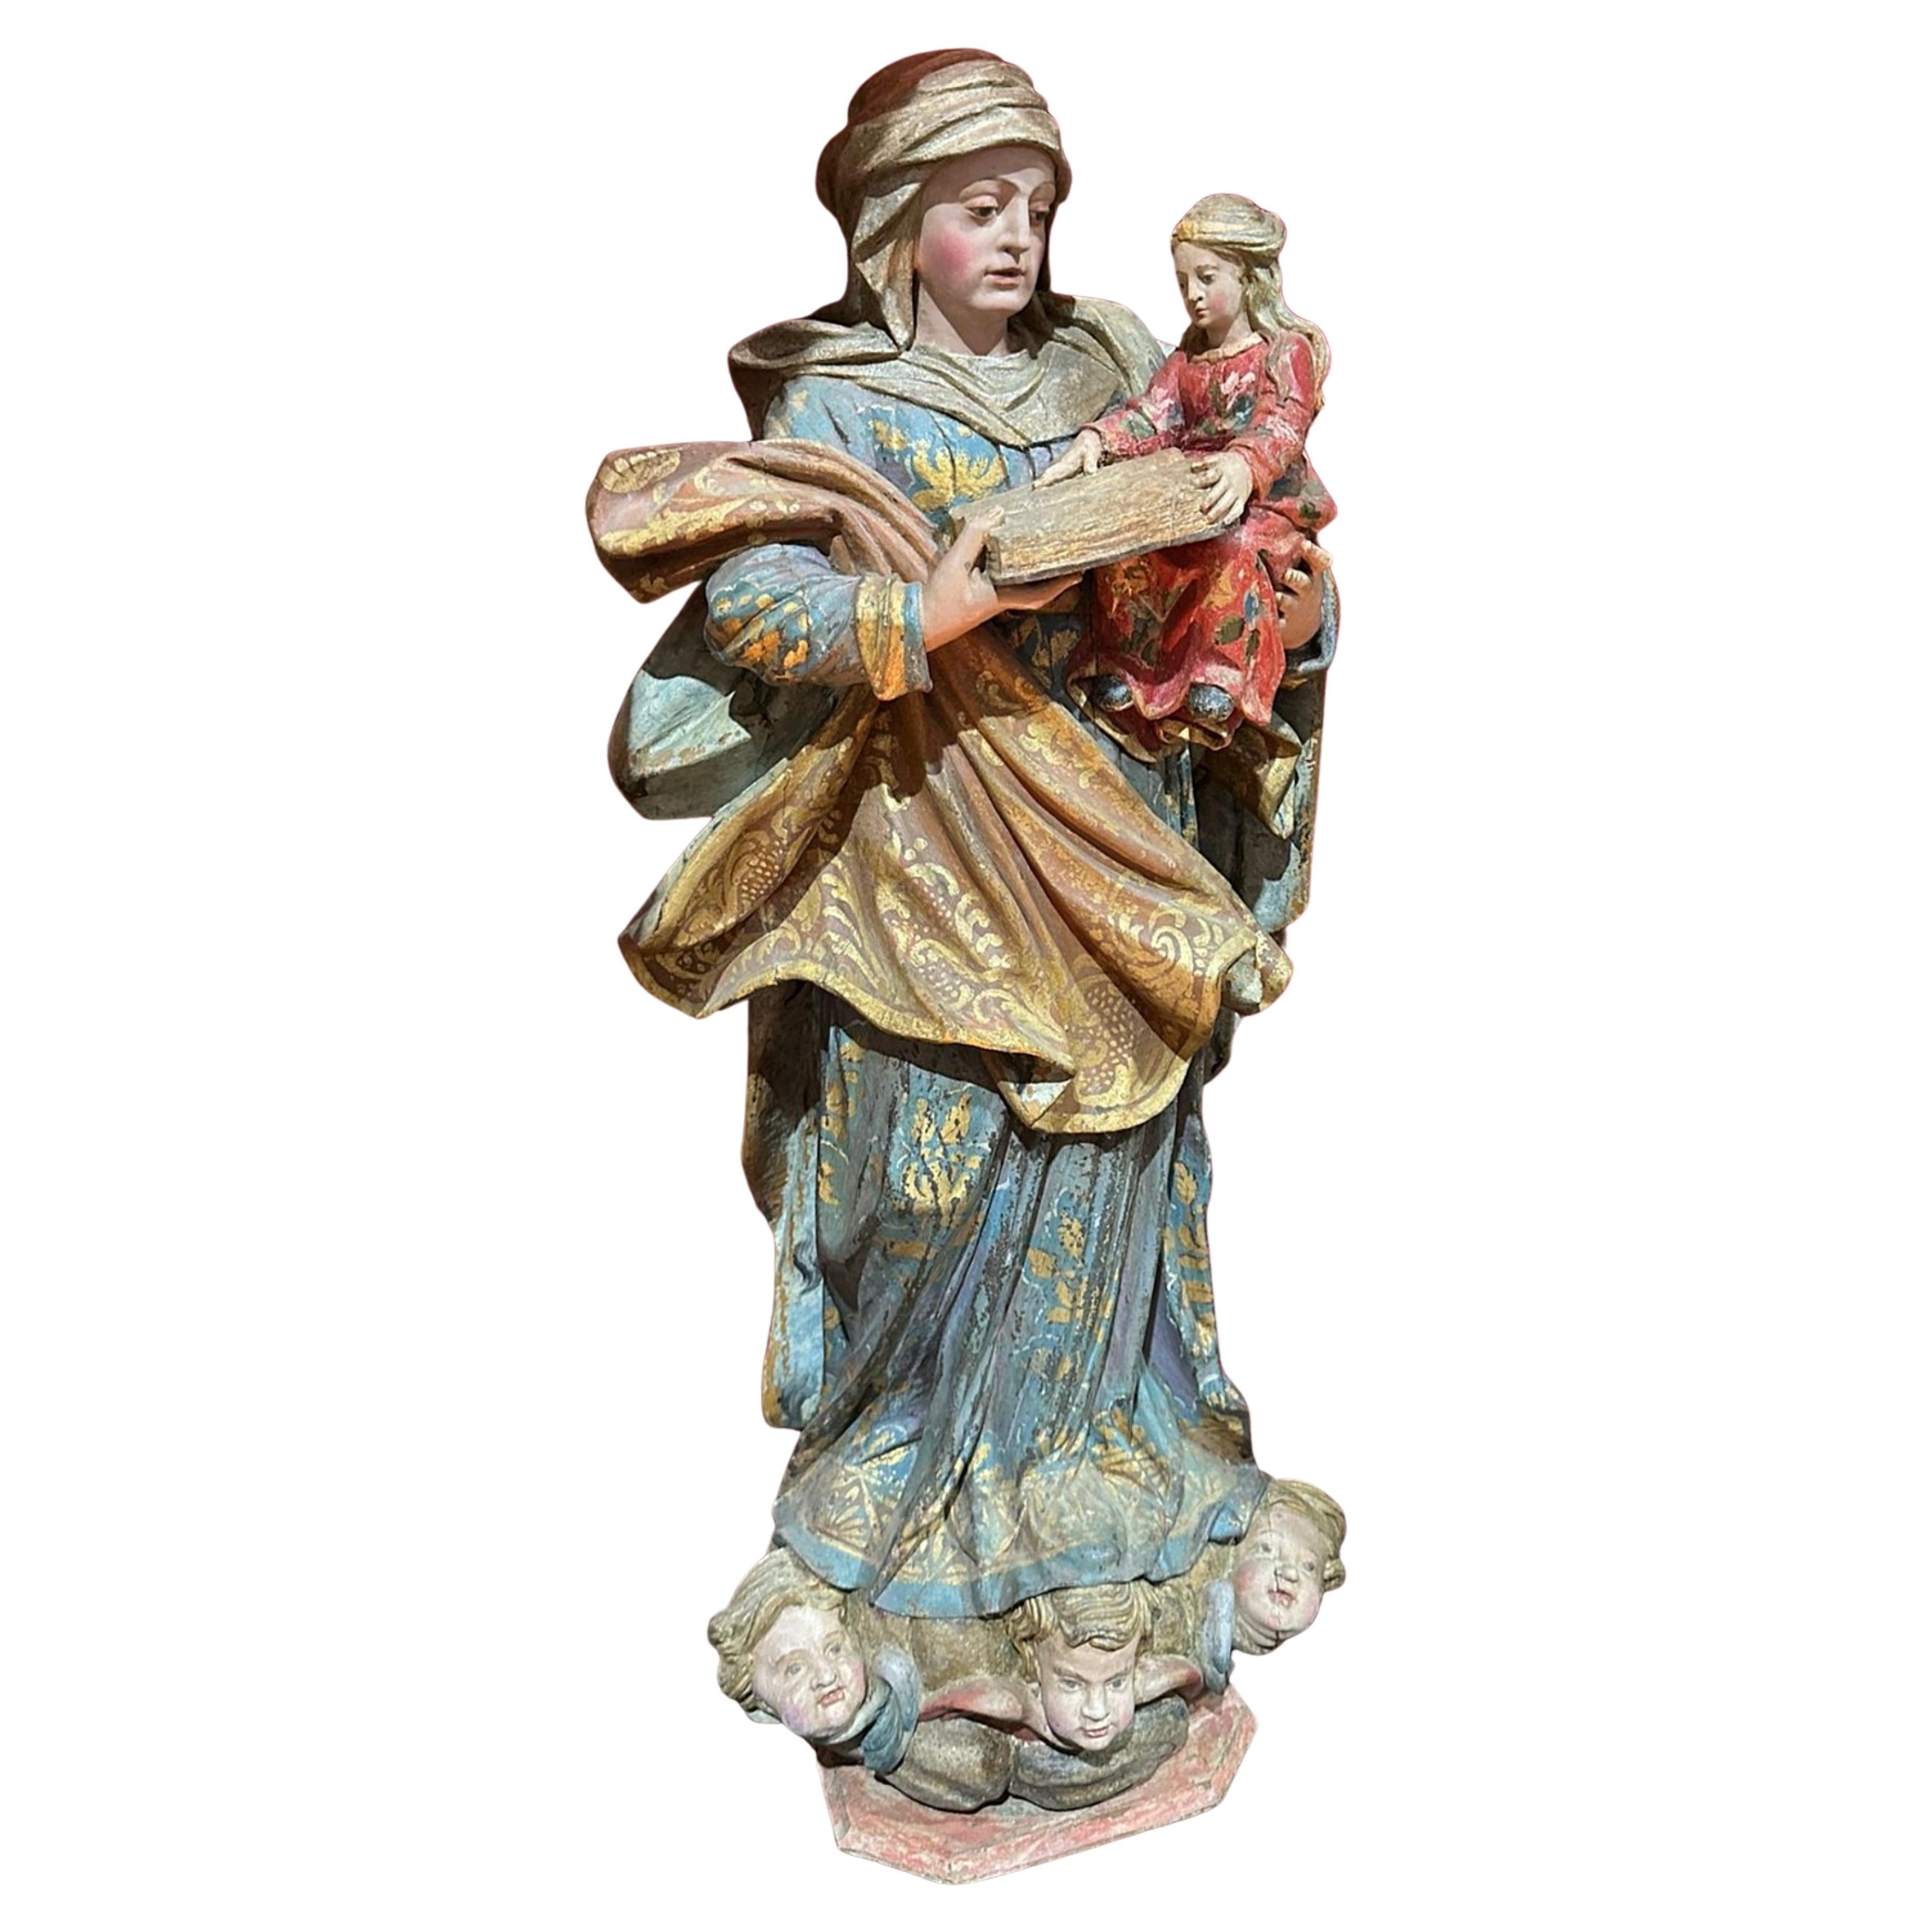 Important Portuguese Sculpture from the 17th Century, "Our Lady and Child Jesus"